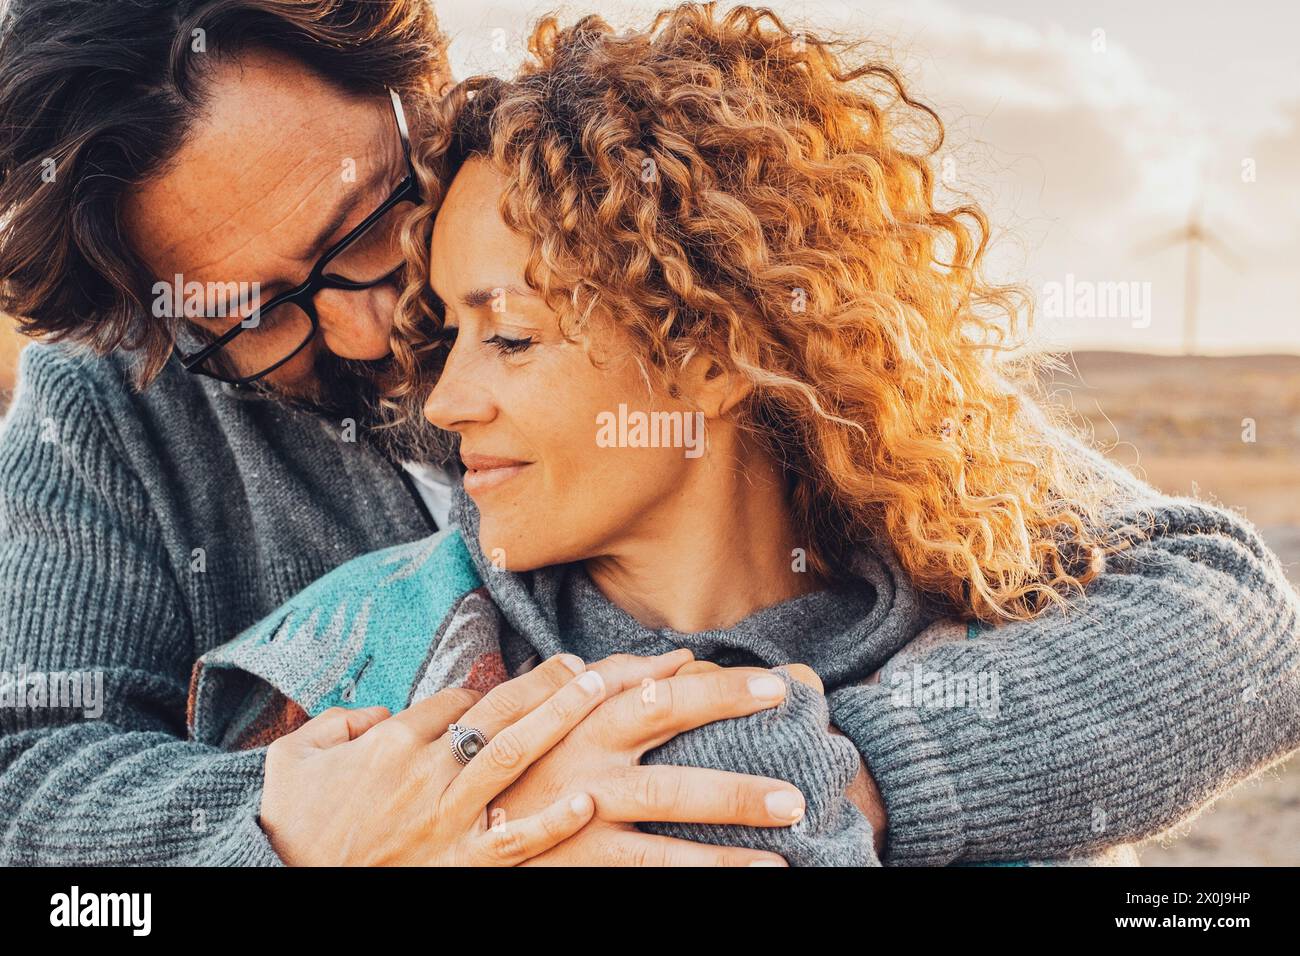 Love and travel people together. One man hug woman from behind in romantic outdoor leisure activity together. Desert scenic landscape in background with windmills and sunset time. Adventure traveler Stock Photo